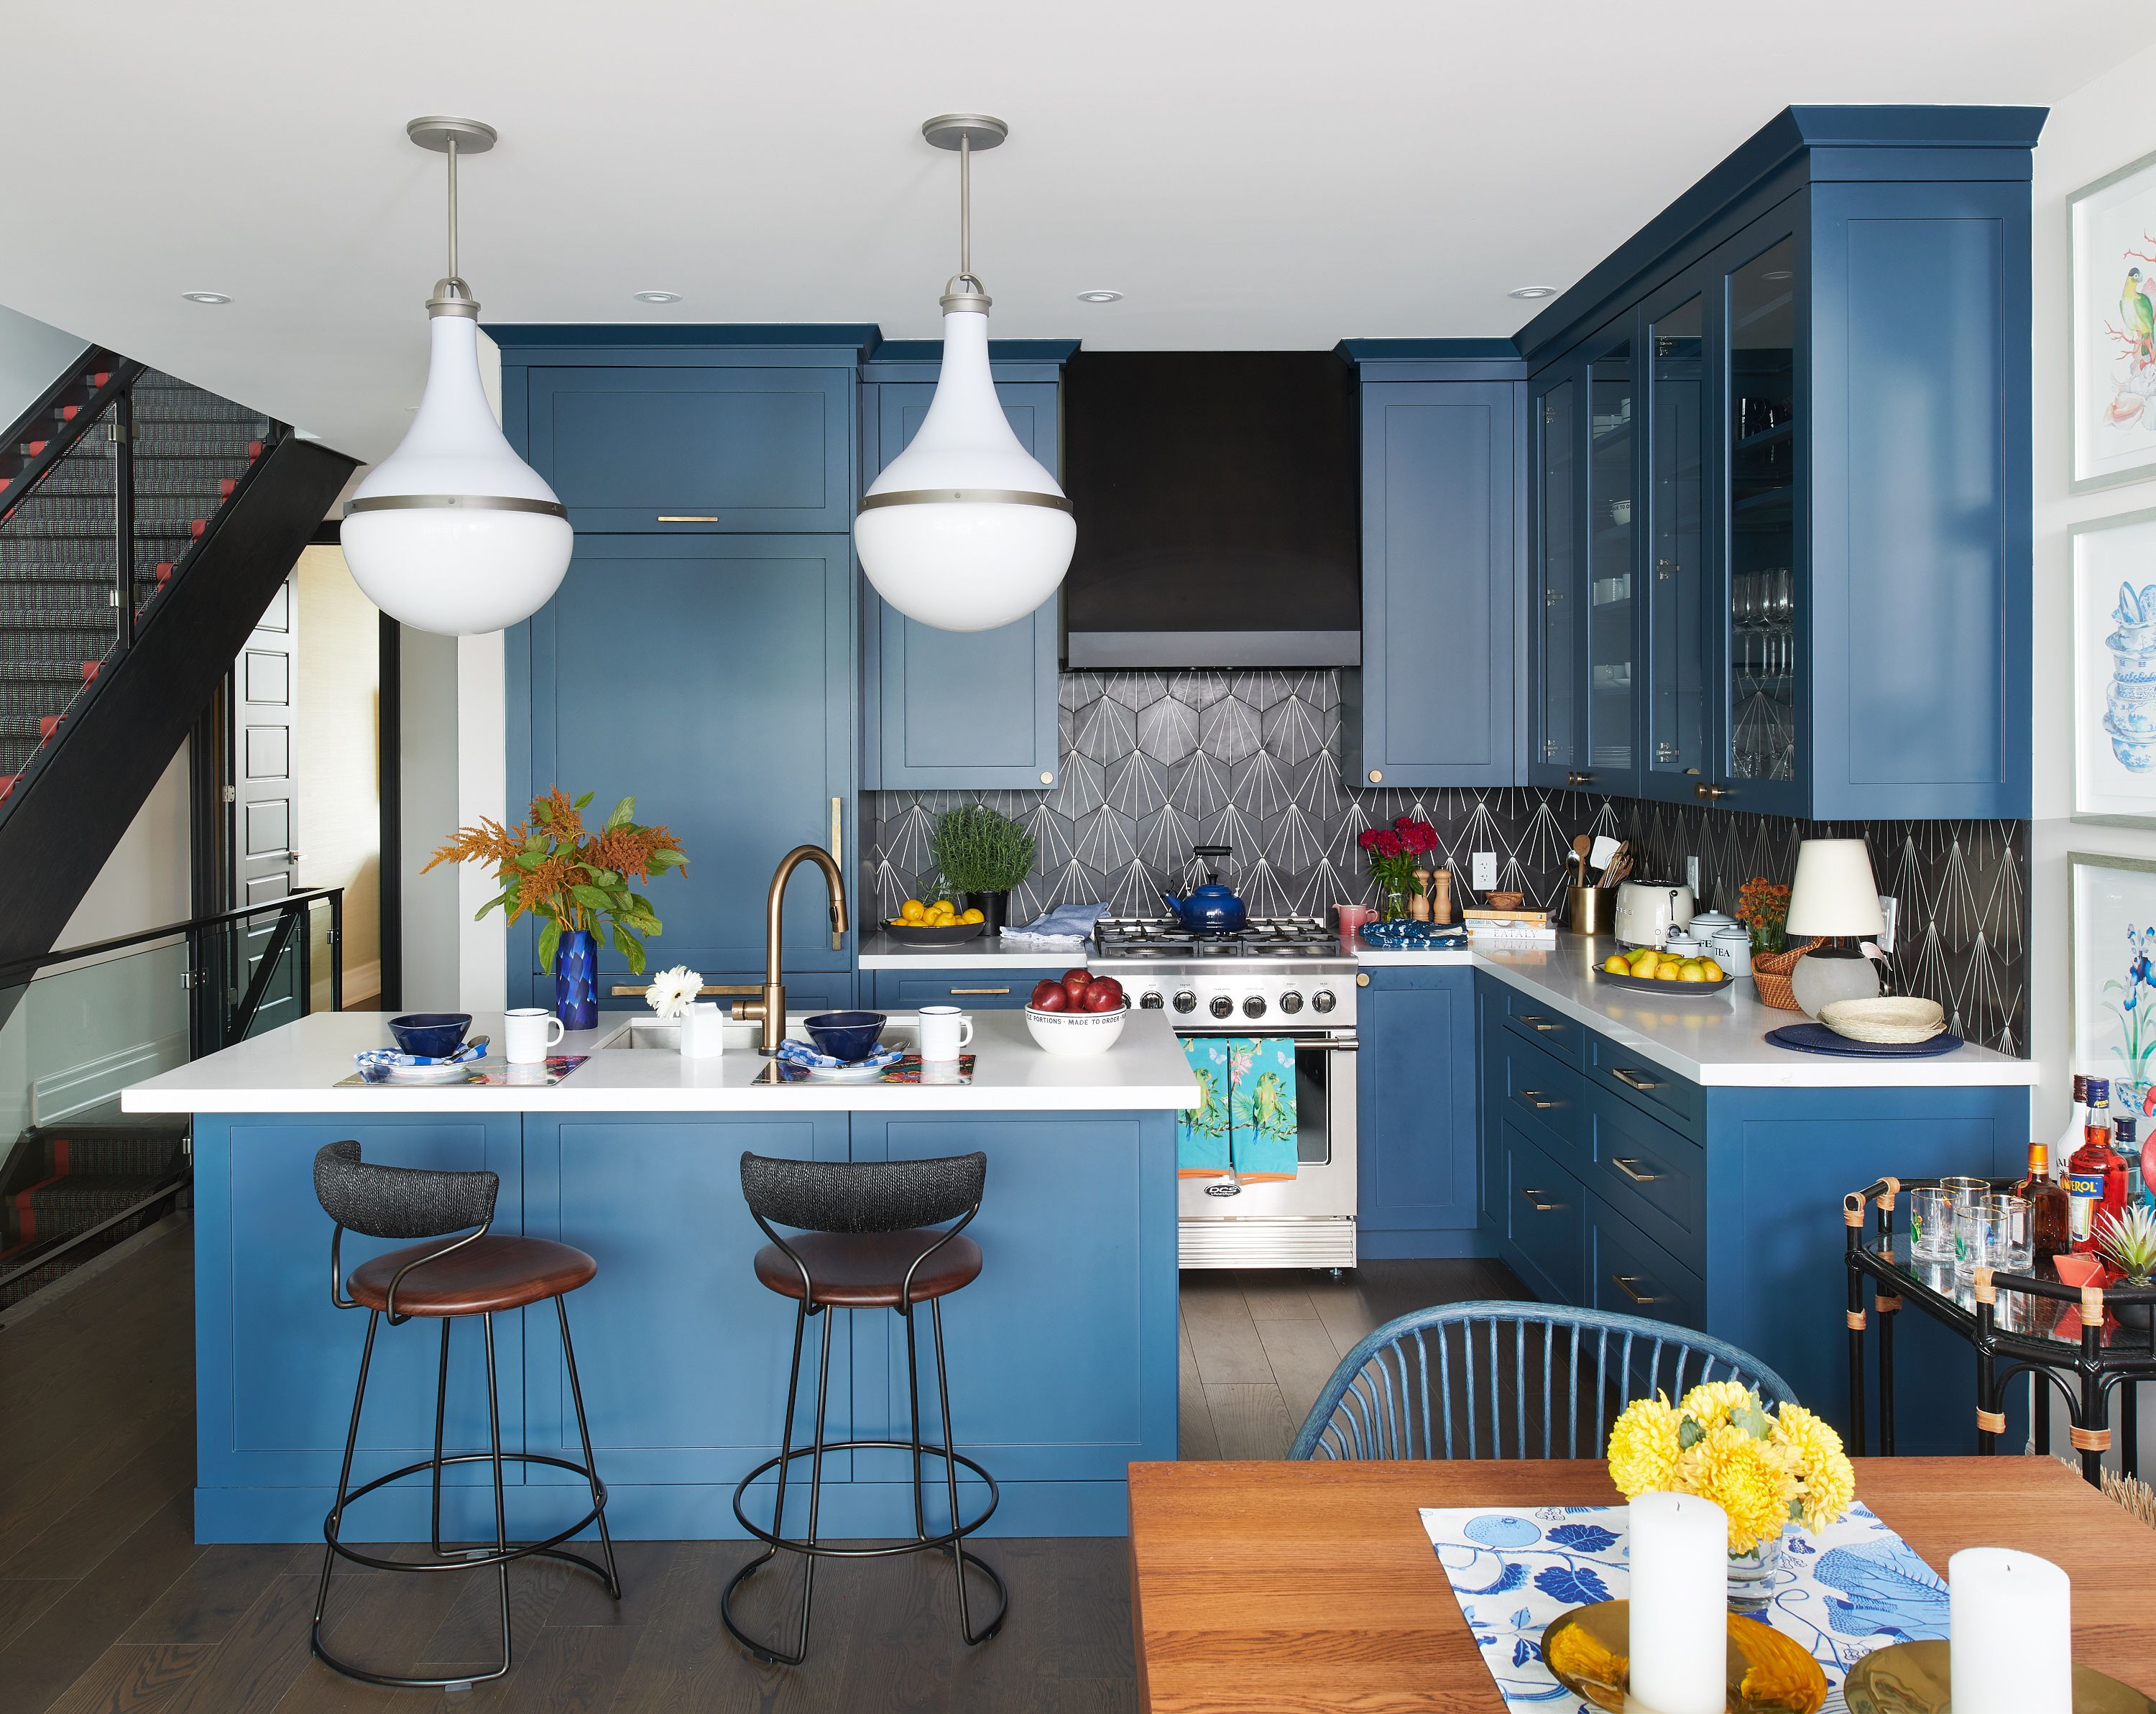 Blue Cabinets And Decor In Kitchen Design, Blue Kitchen Units What Colour Walls